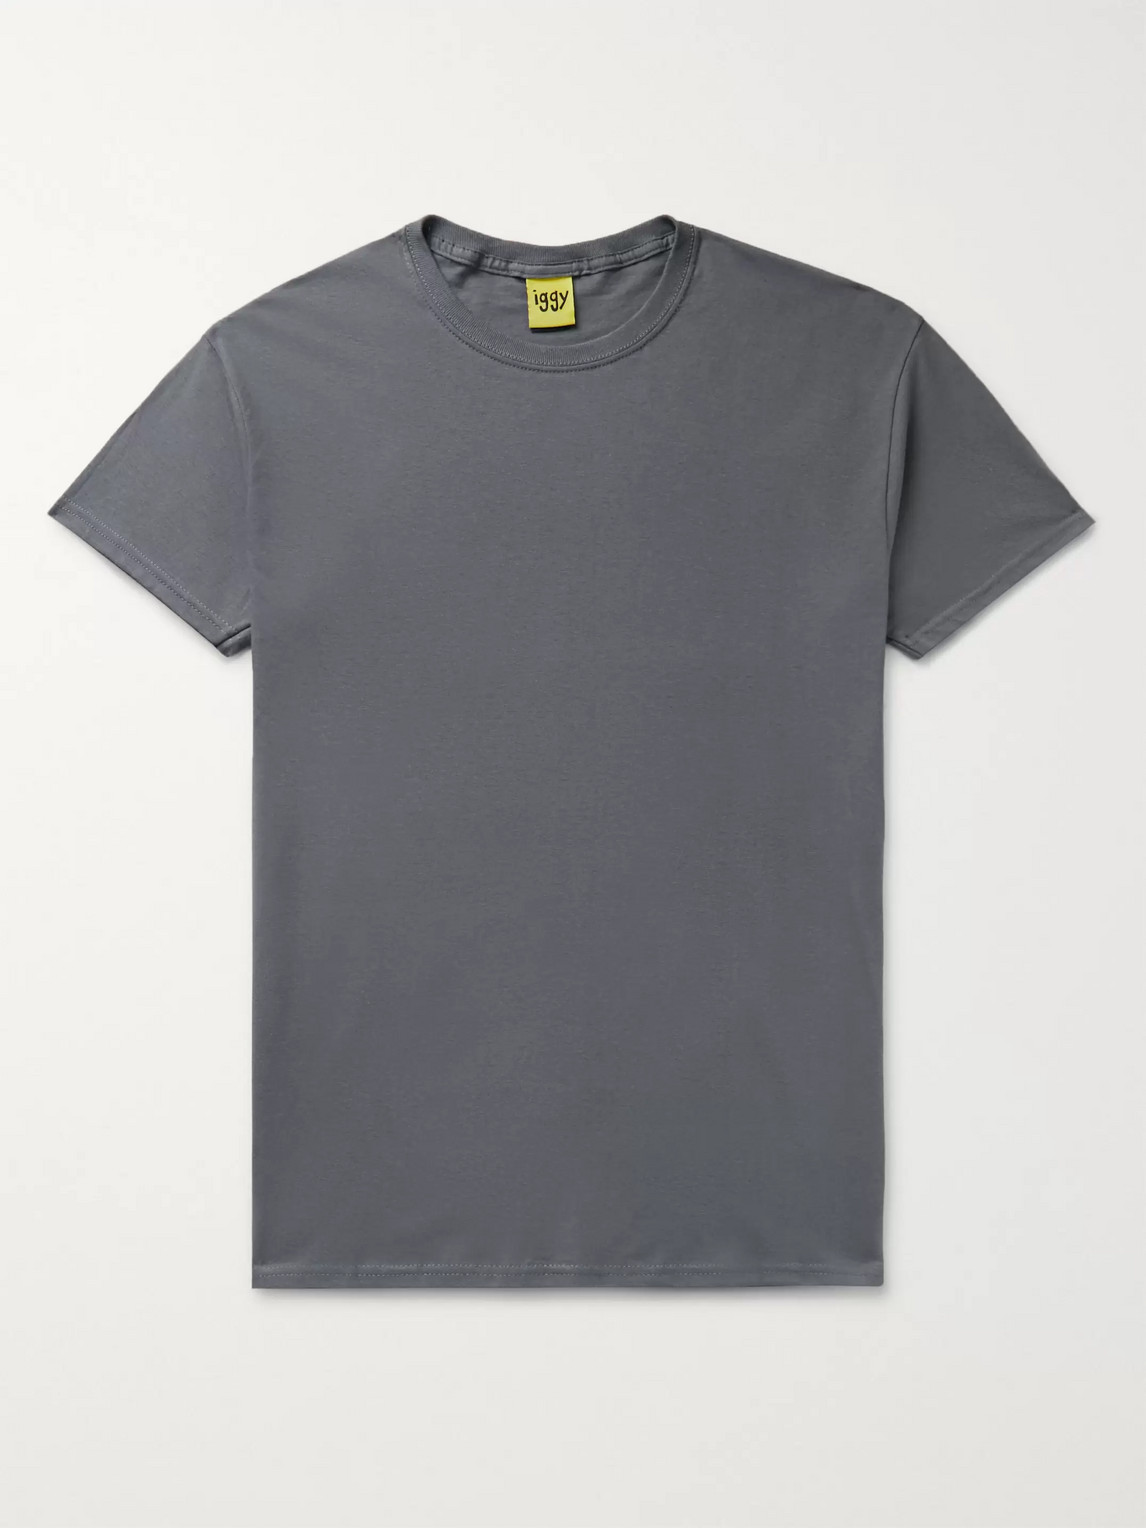 Iggy Drainpool Printed Cotton-jersey T-shirt In Gray